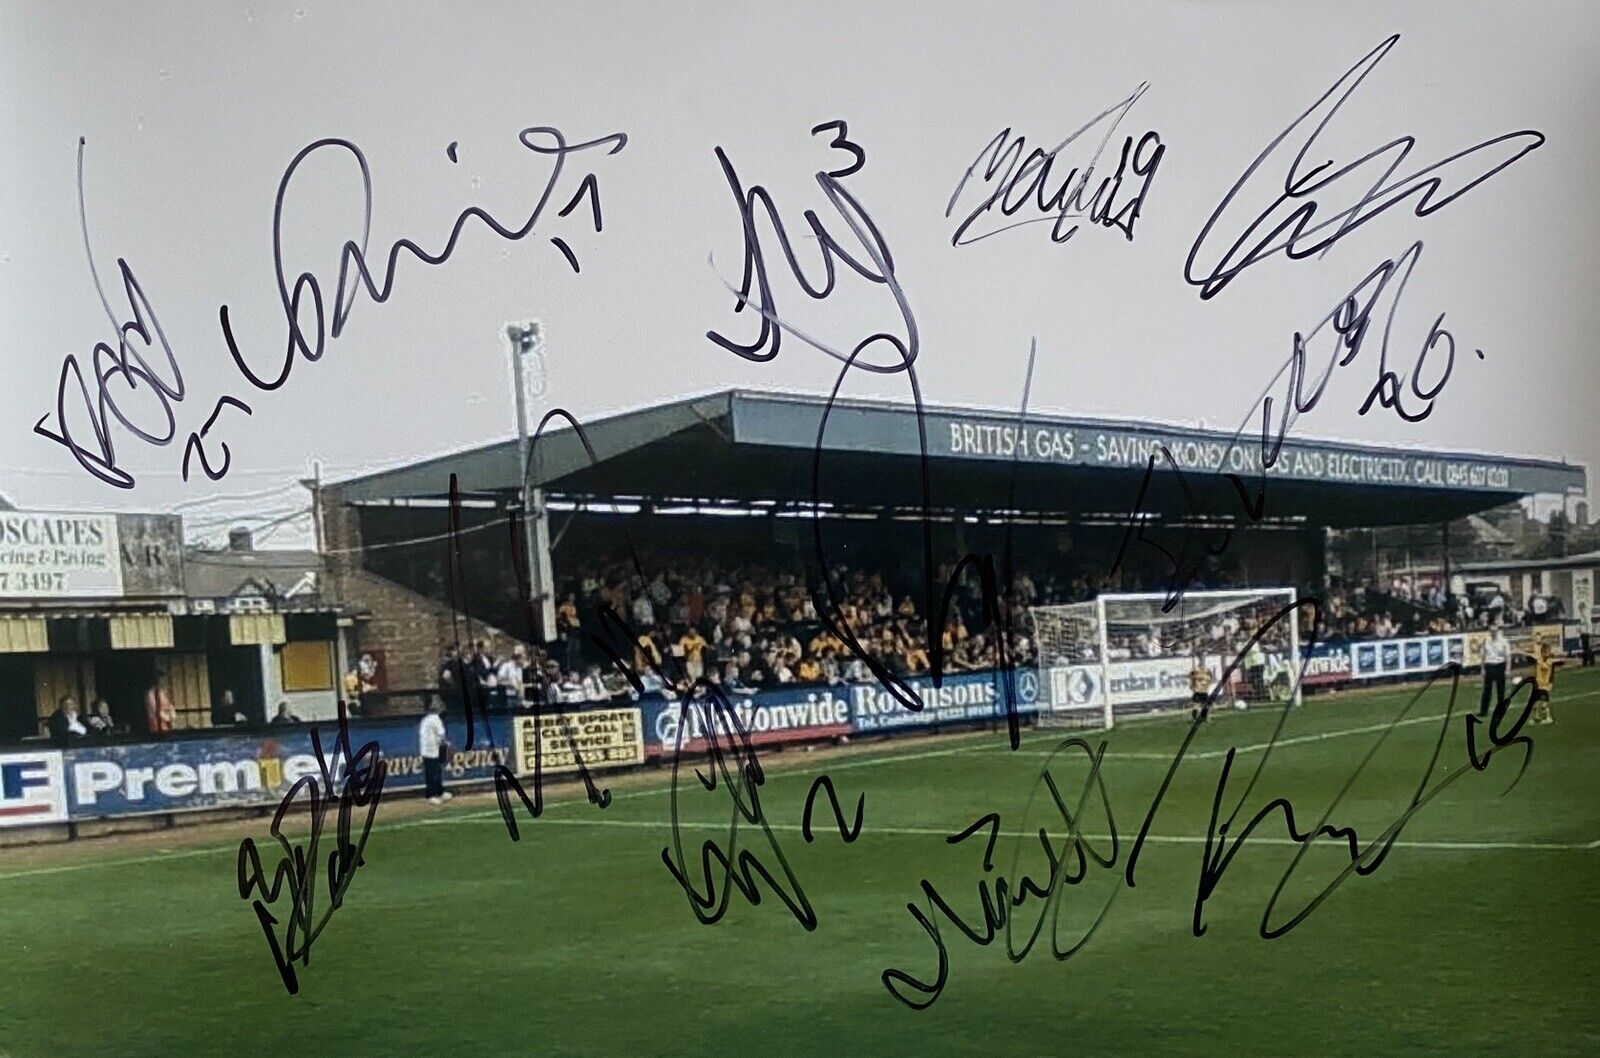 Cambridge Unite 12x8 Photo Poster painting Signed By 20/21 Squad Inc Mullin, Bowen, May